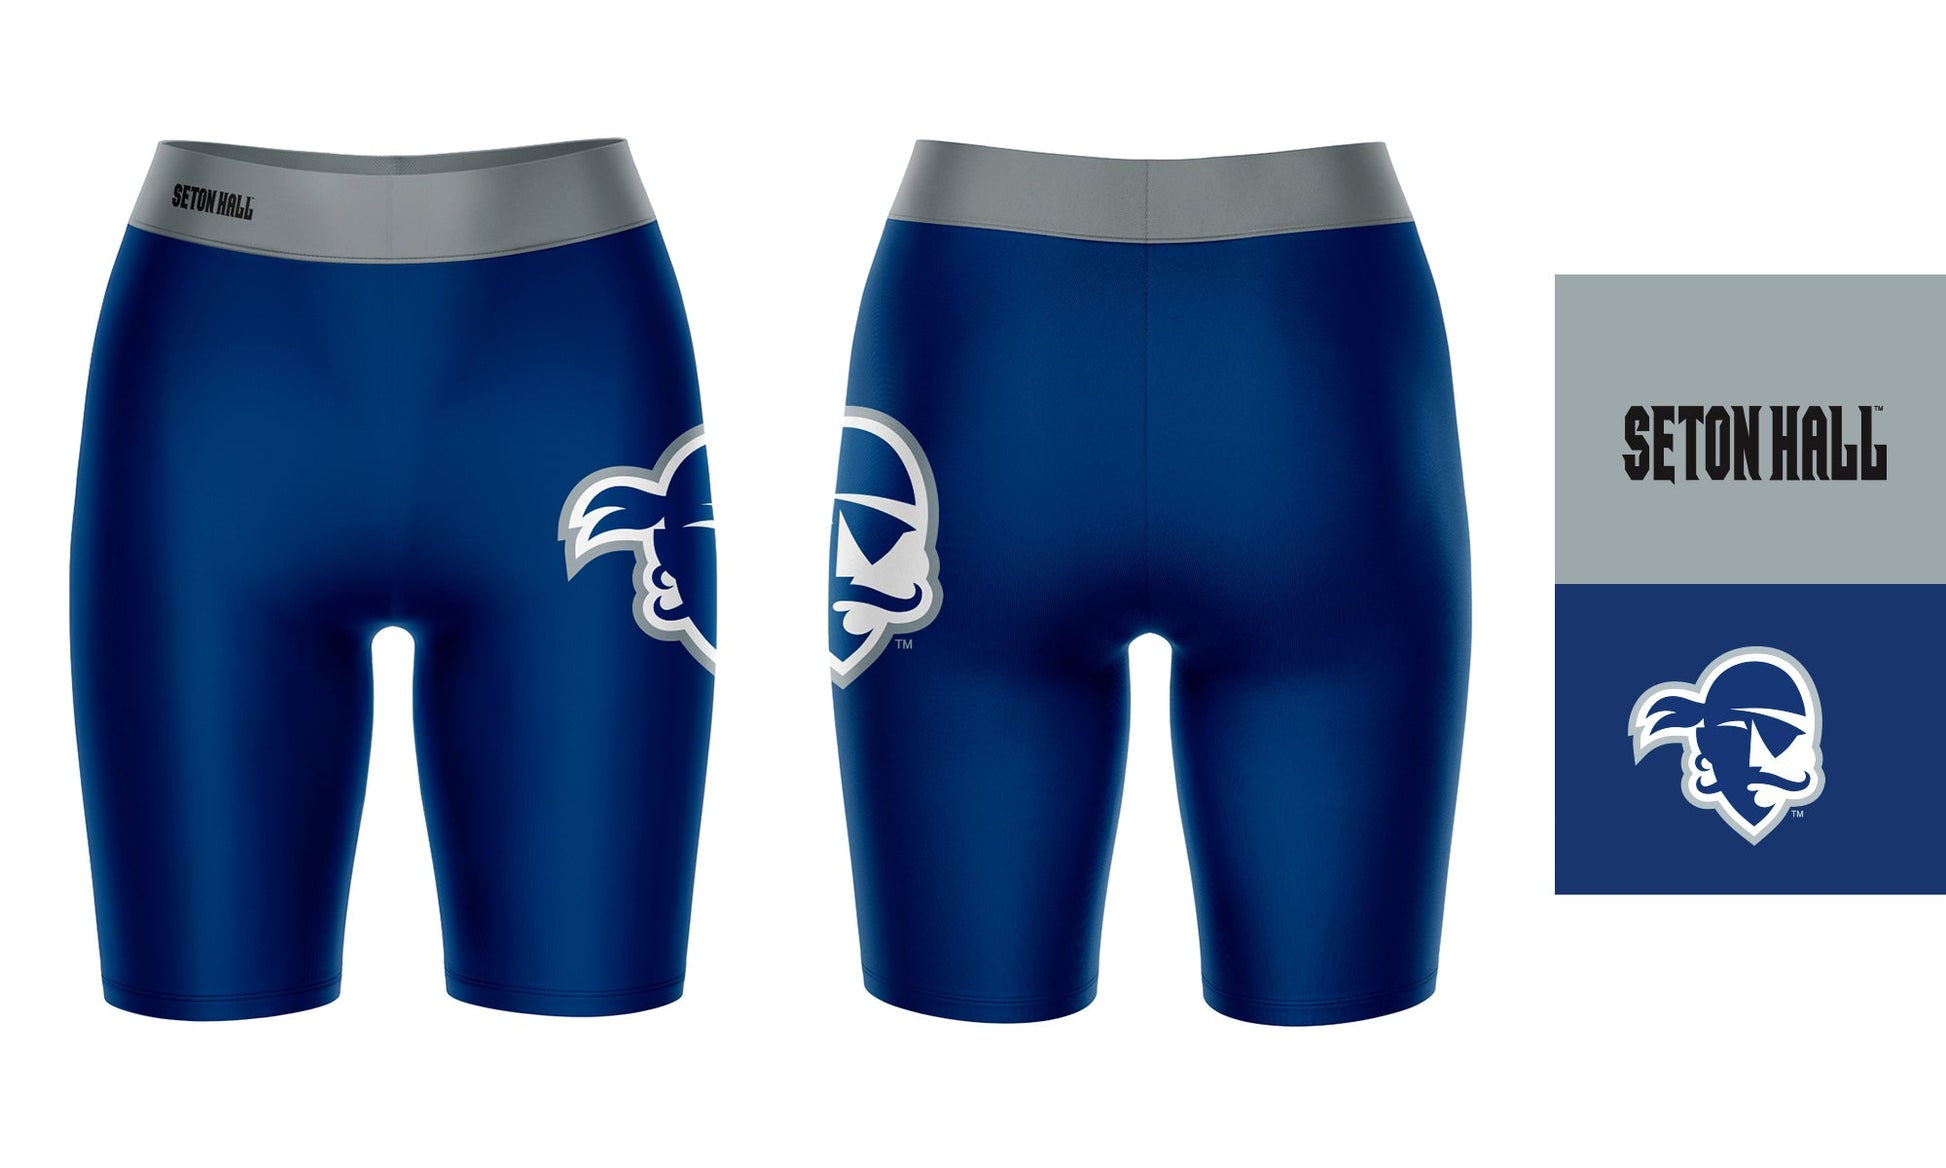 Seton Hall Pirates Vive La Fete Game Day Logo on Thigh and Waistband Blue and Gray Women Bike Short 9 Inseam